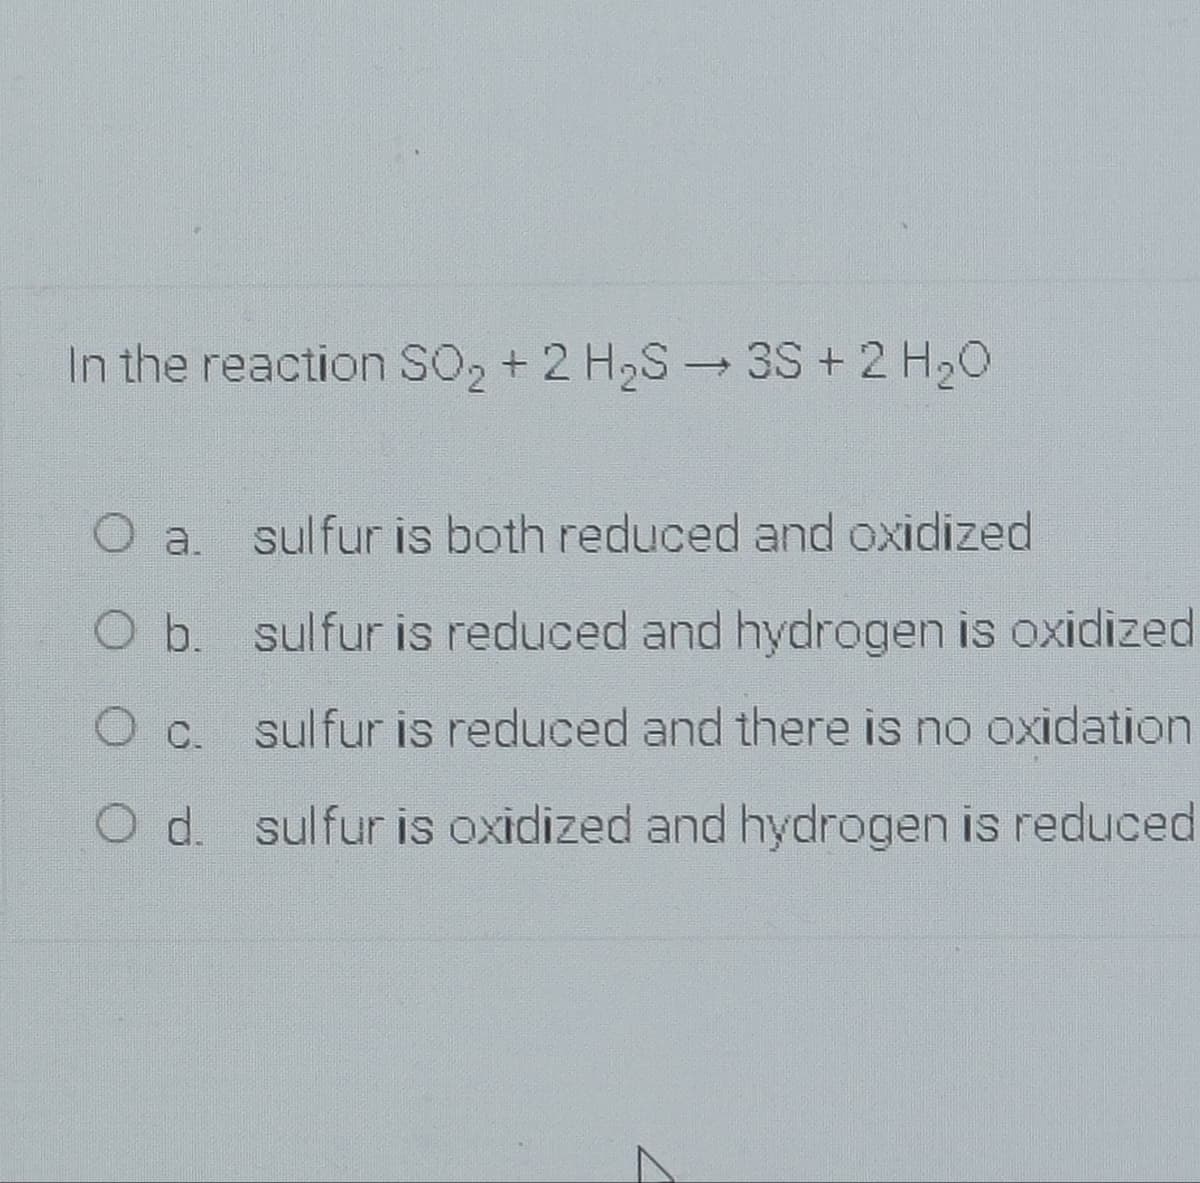 In the reaction SO2 + 2 H2S 3S + 2 H20
O a. sulfur is both reduced and oxidized
O b. sulfur is reduced and hydrogen is oxidized
sulfur is reduced and there is no oxidation
O d. sulfur is oxidized and hydrogen is reduced
